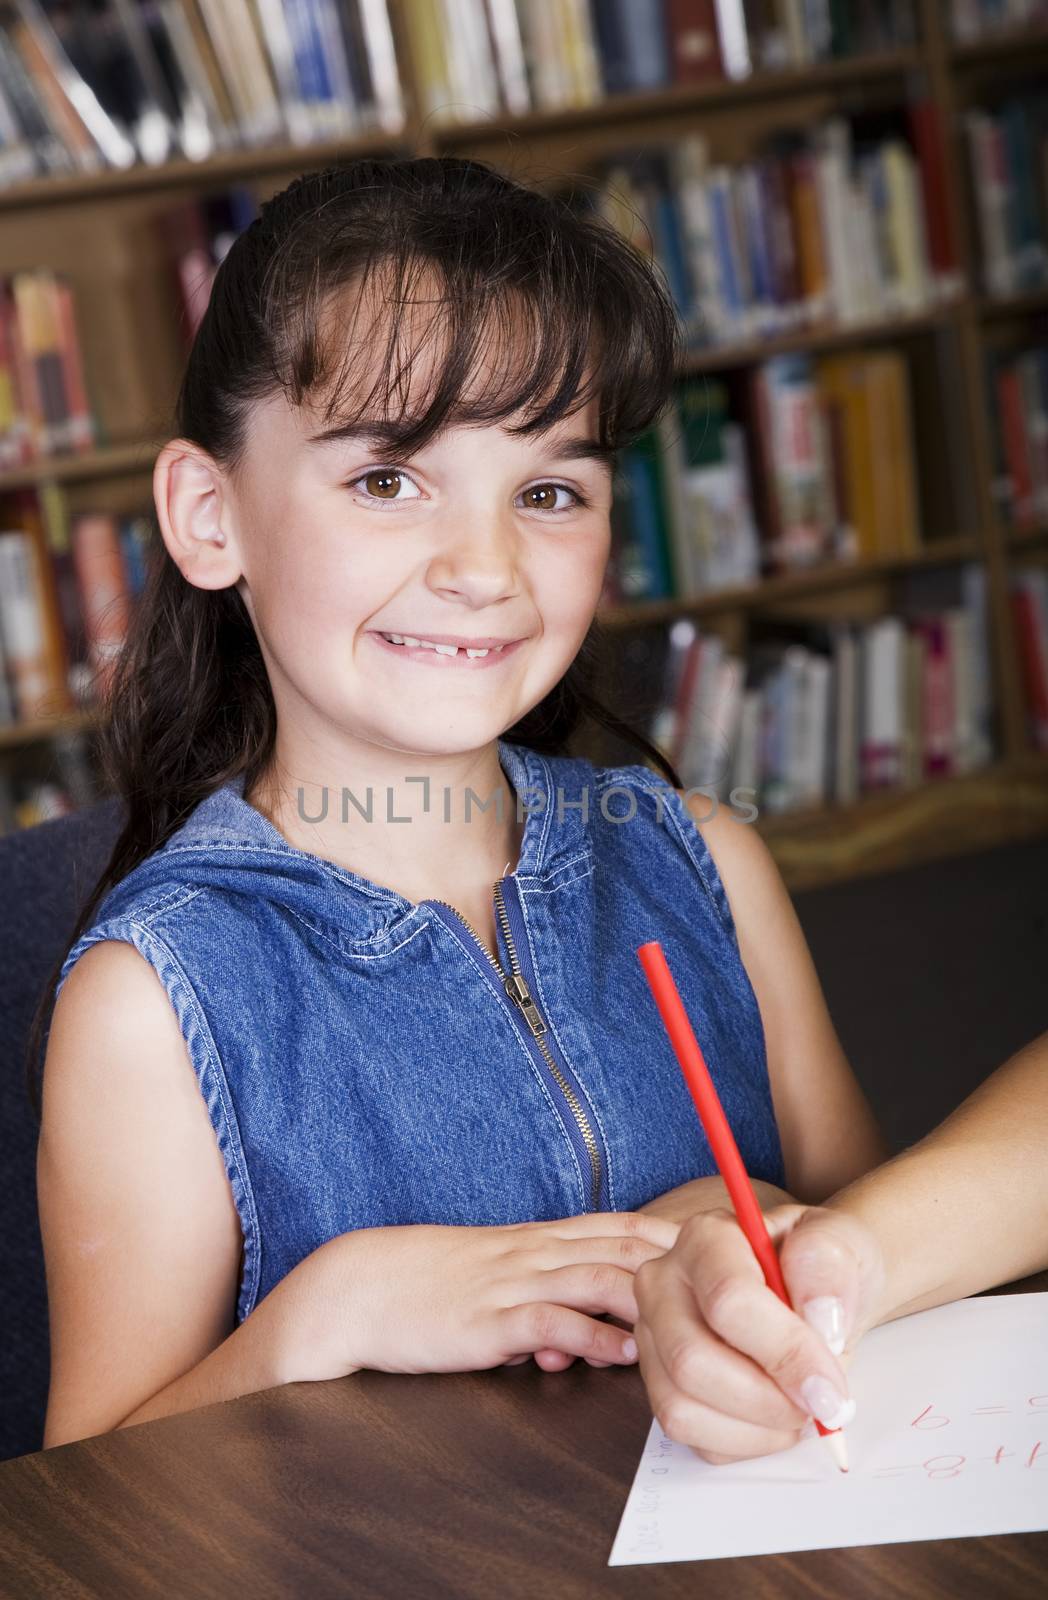 A child smiling from her desk in the school library.